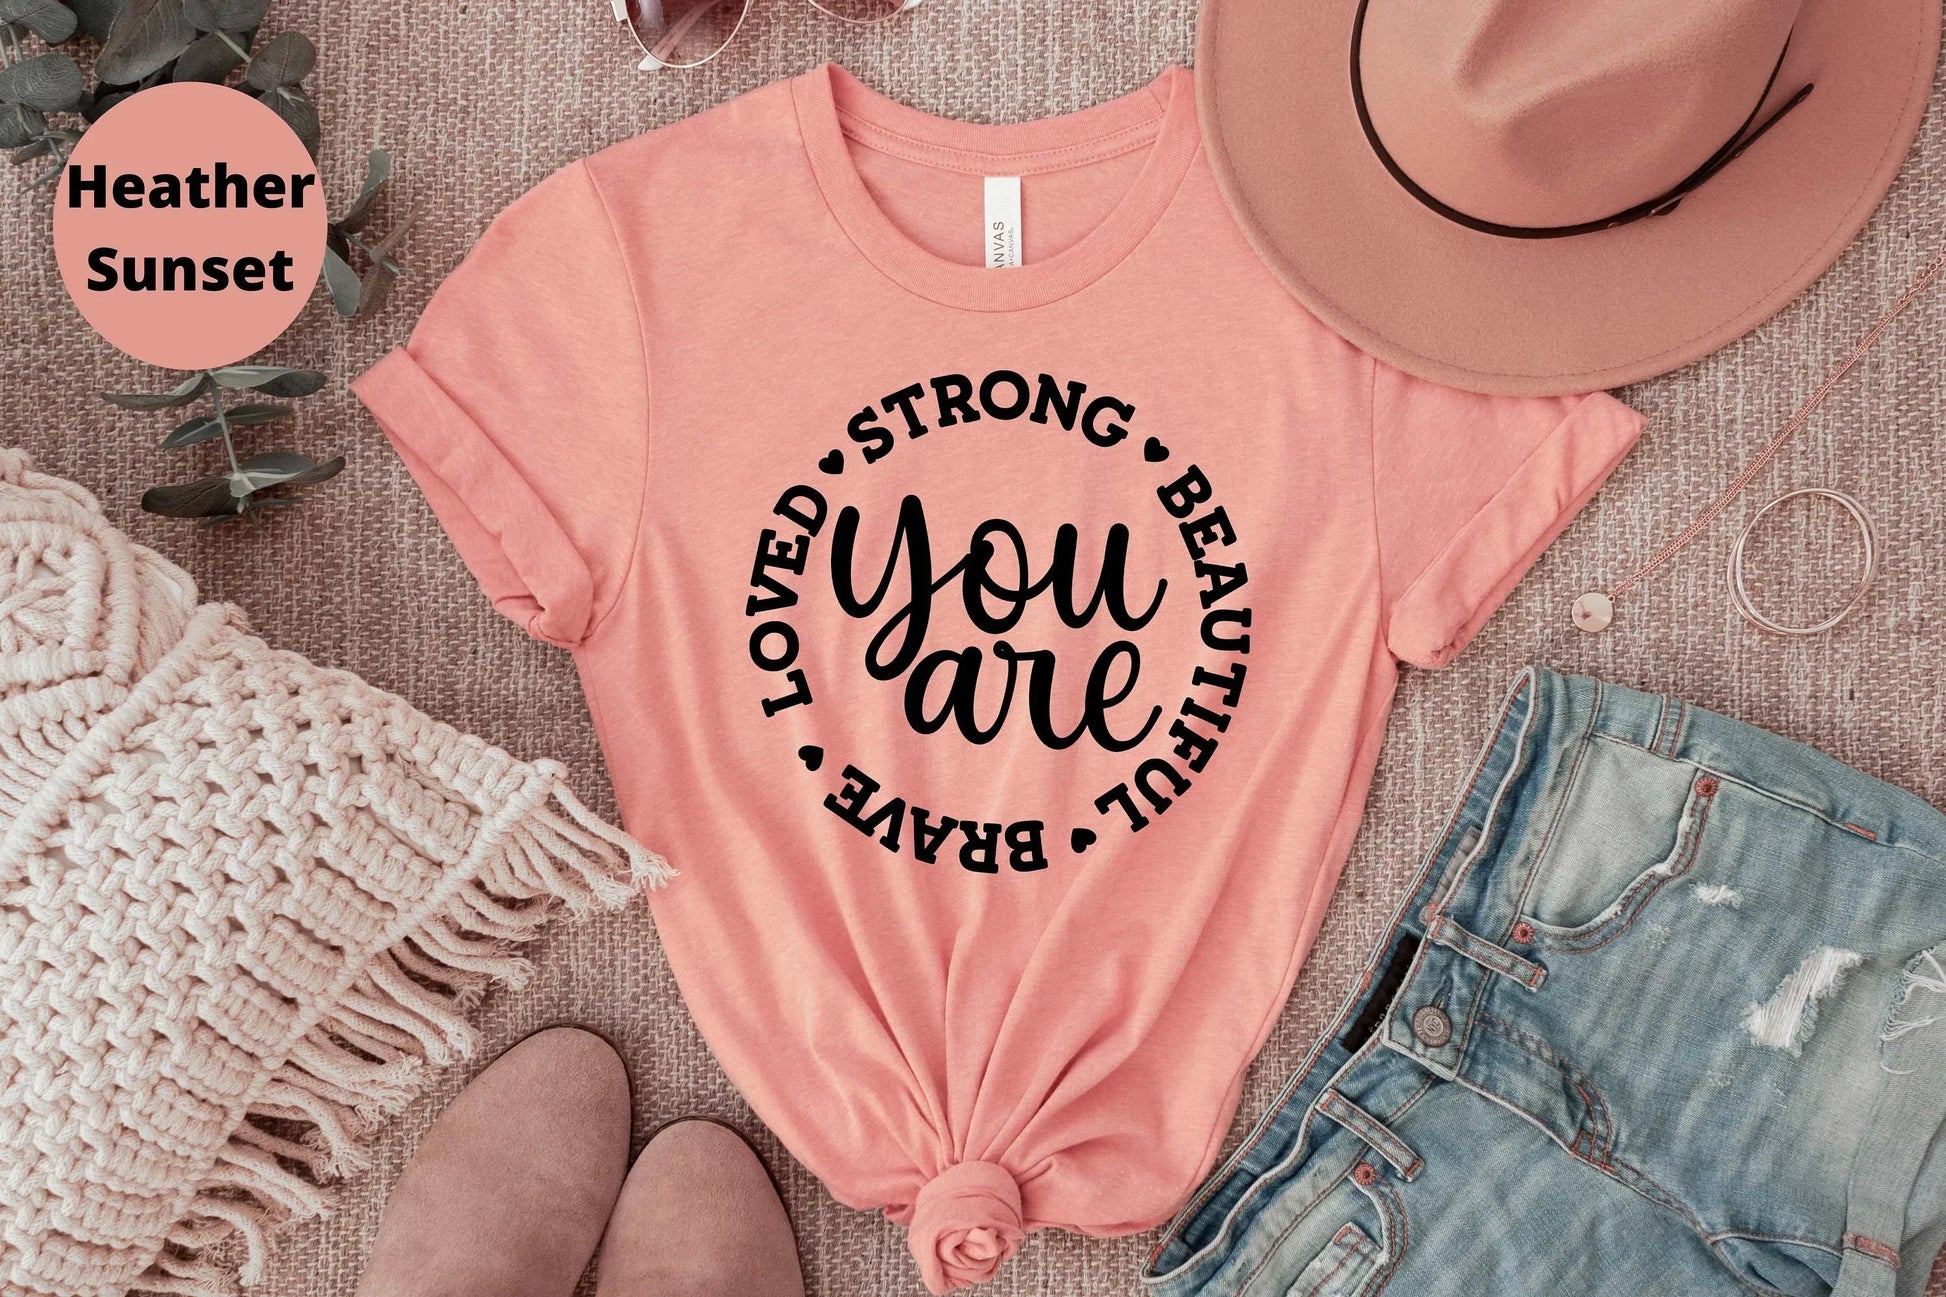 You are Loved Strong Beautiful Brave, Christian Self Love Shirt